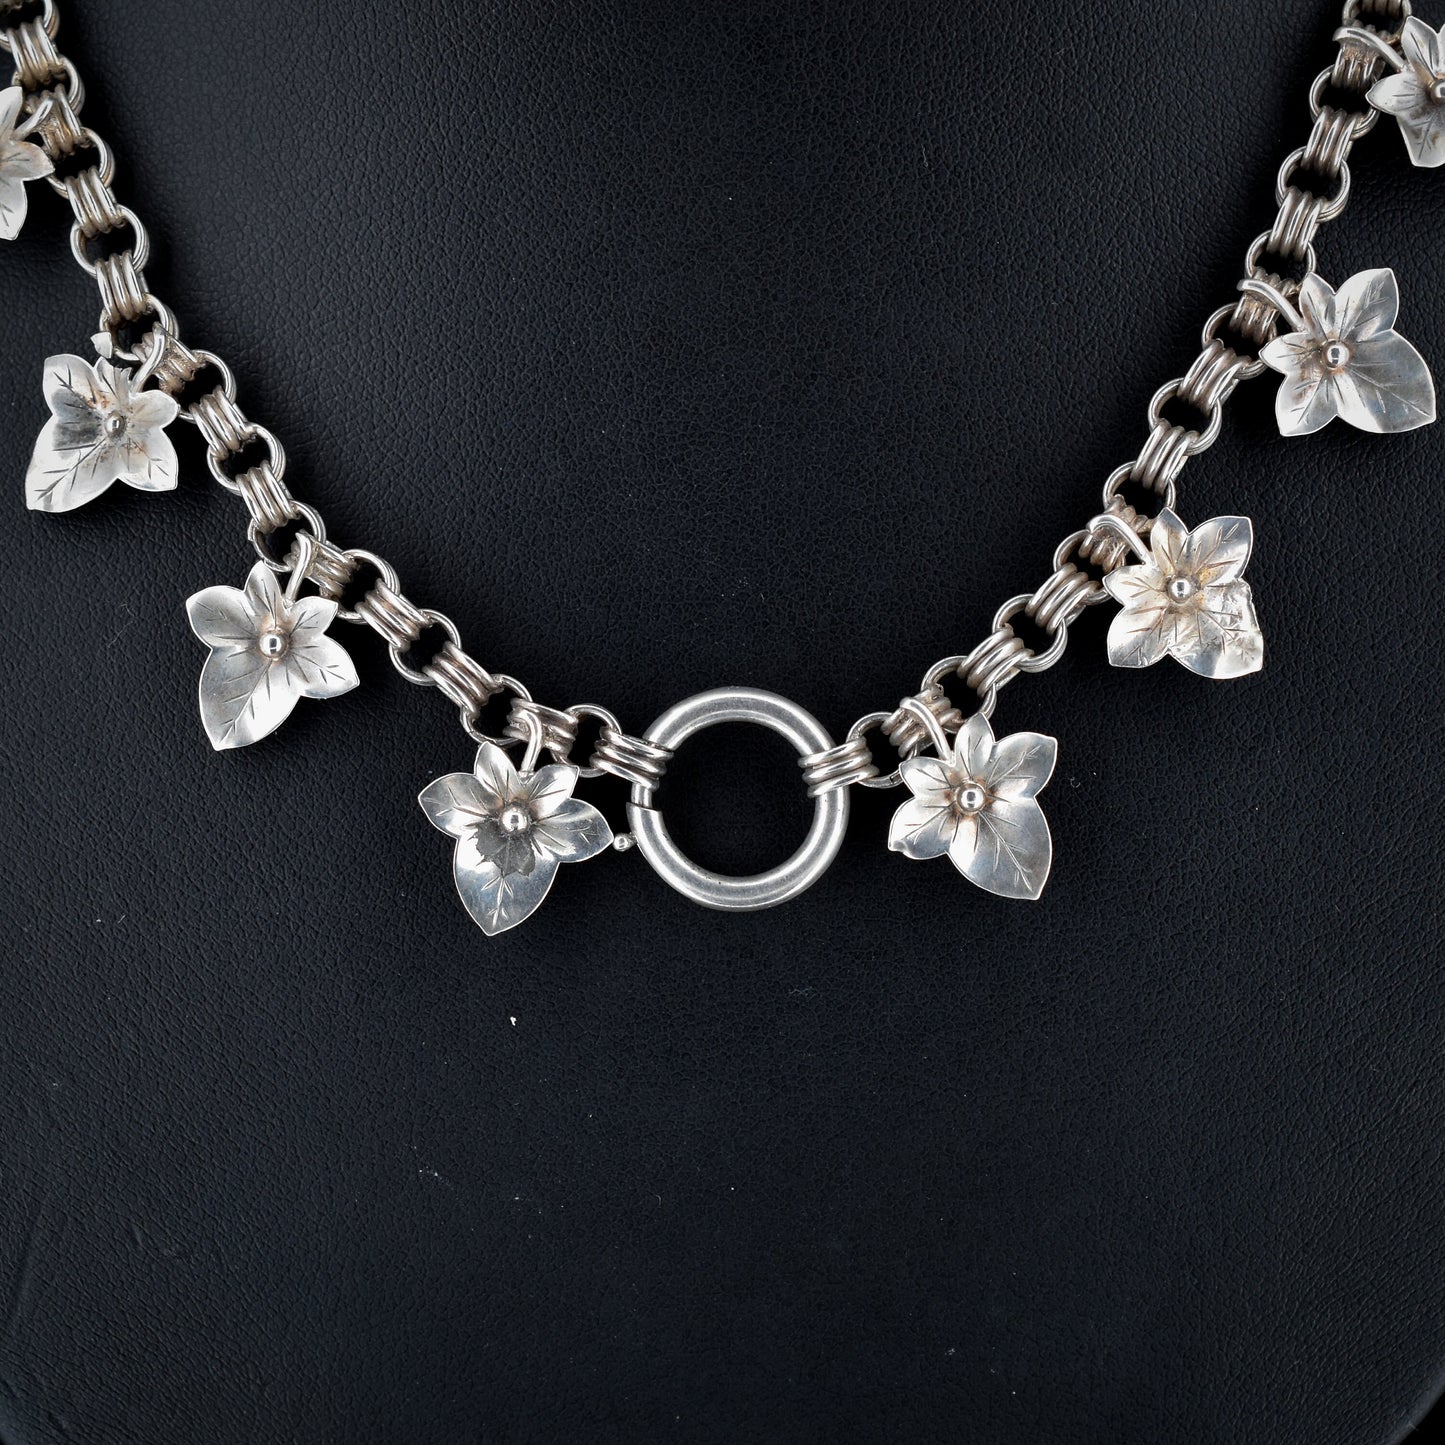 Antique Victorian Aesthetic Ivy Leaf Sterling Silver Chain Collar Necklace | 17" with Bolt Ring